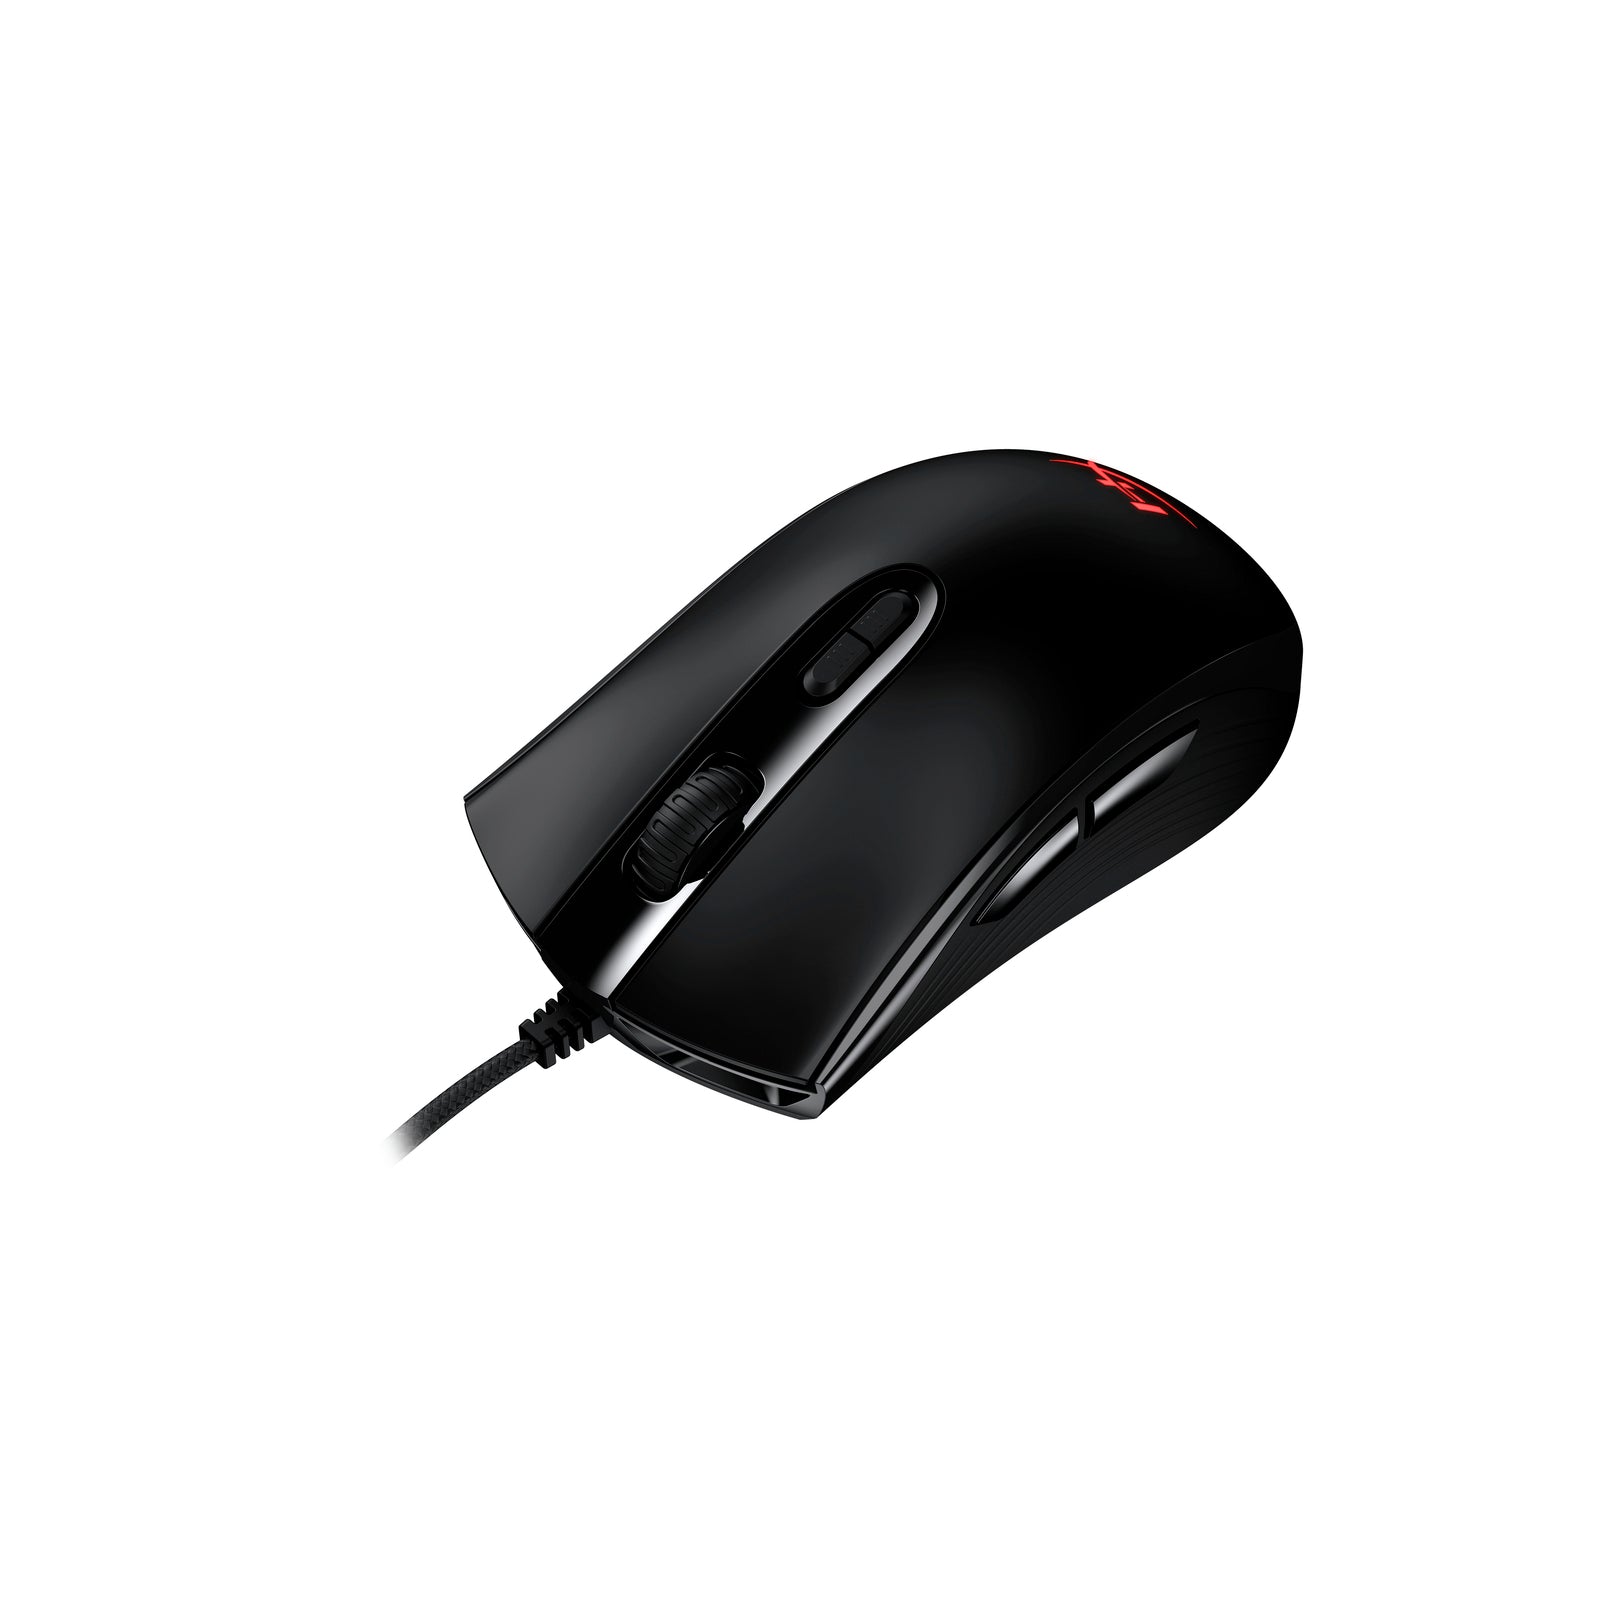 Pulsefire Core - RGB Gaming Mouse | HyperX